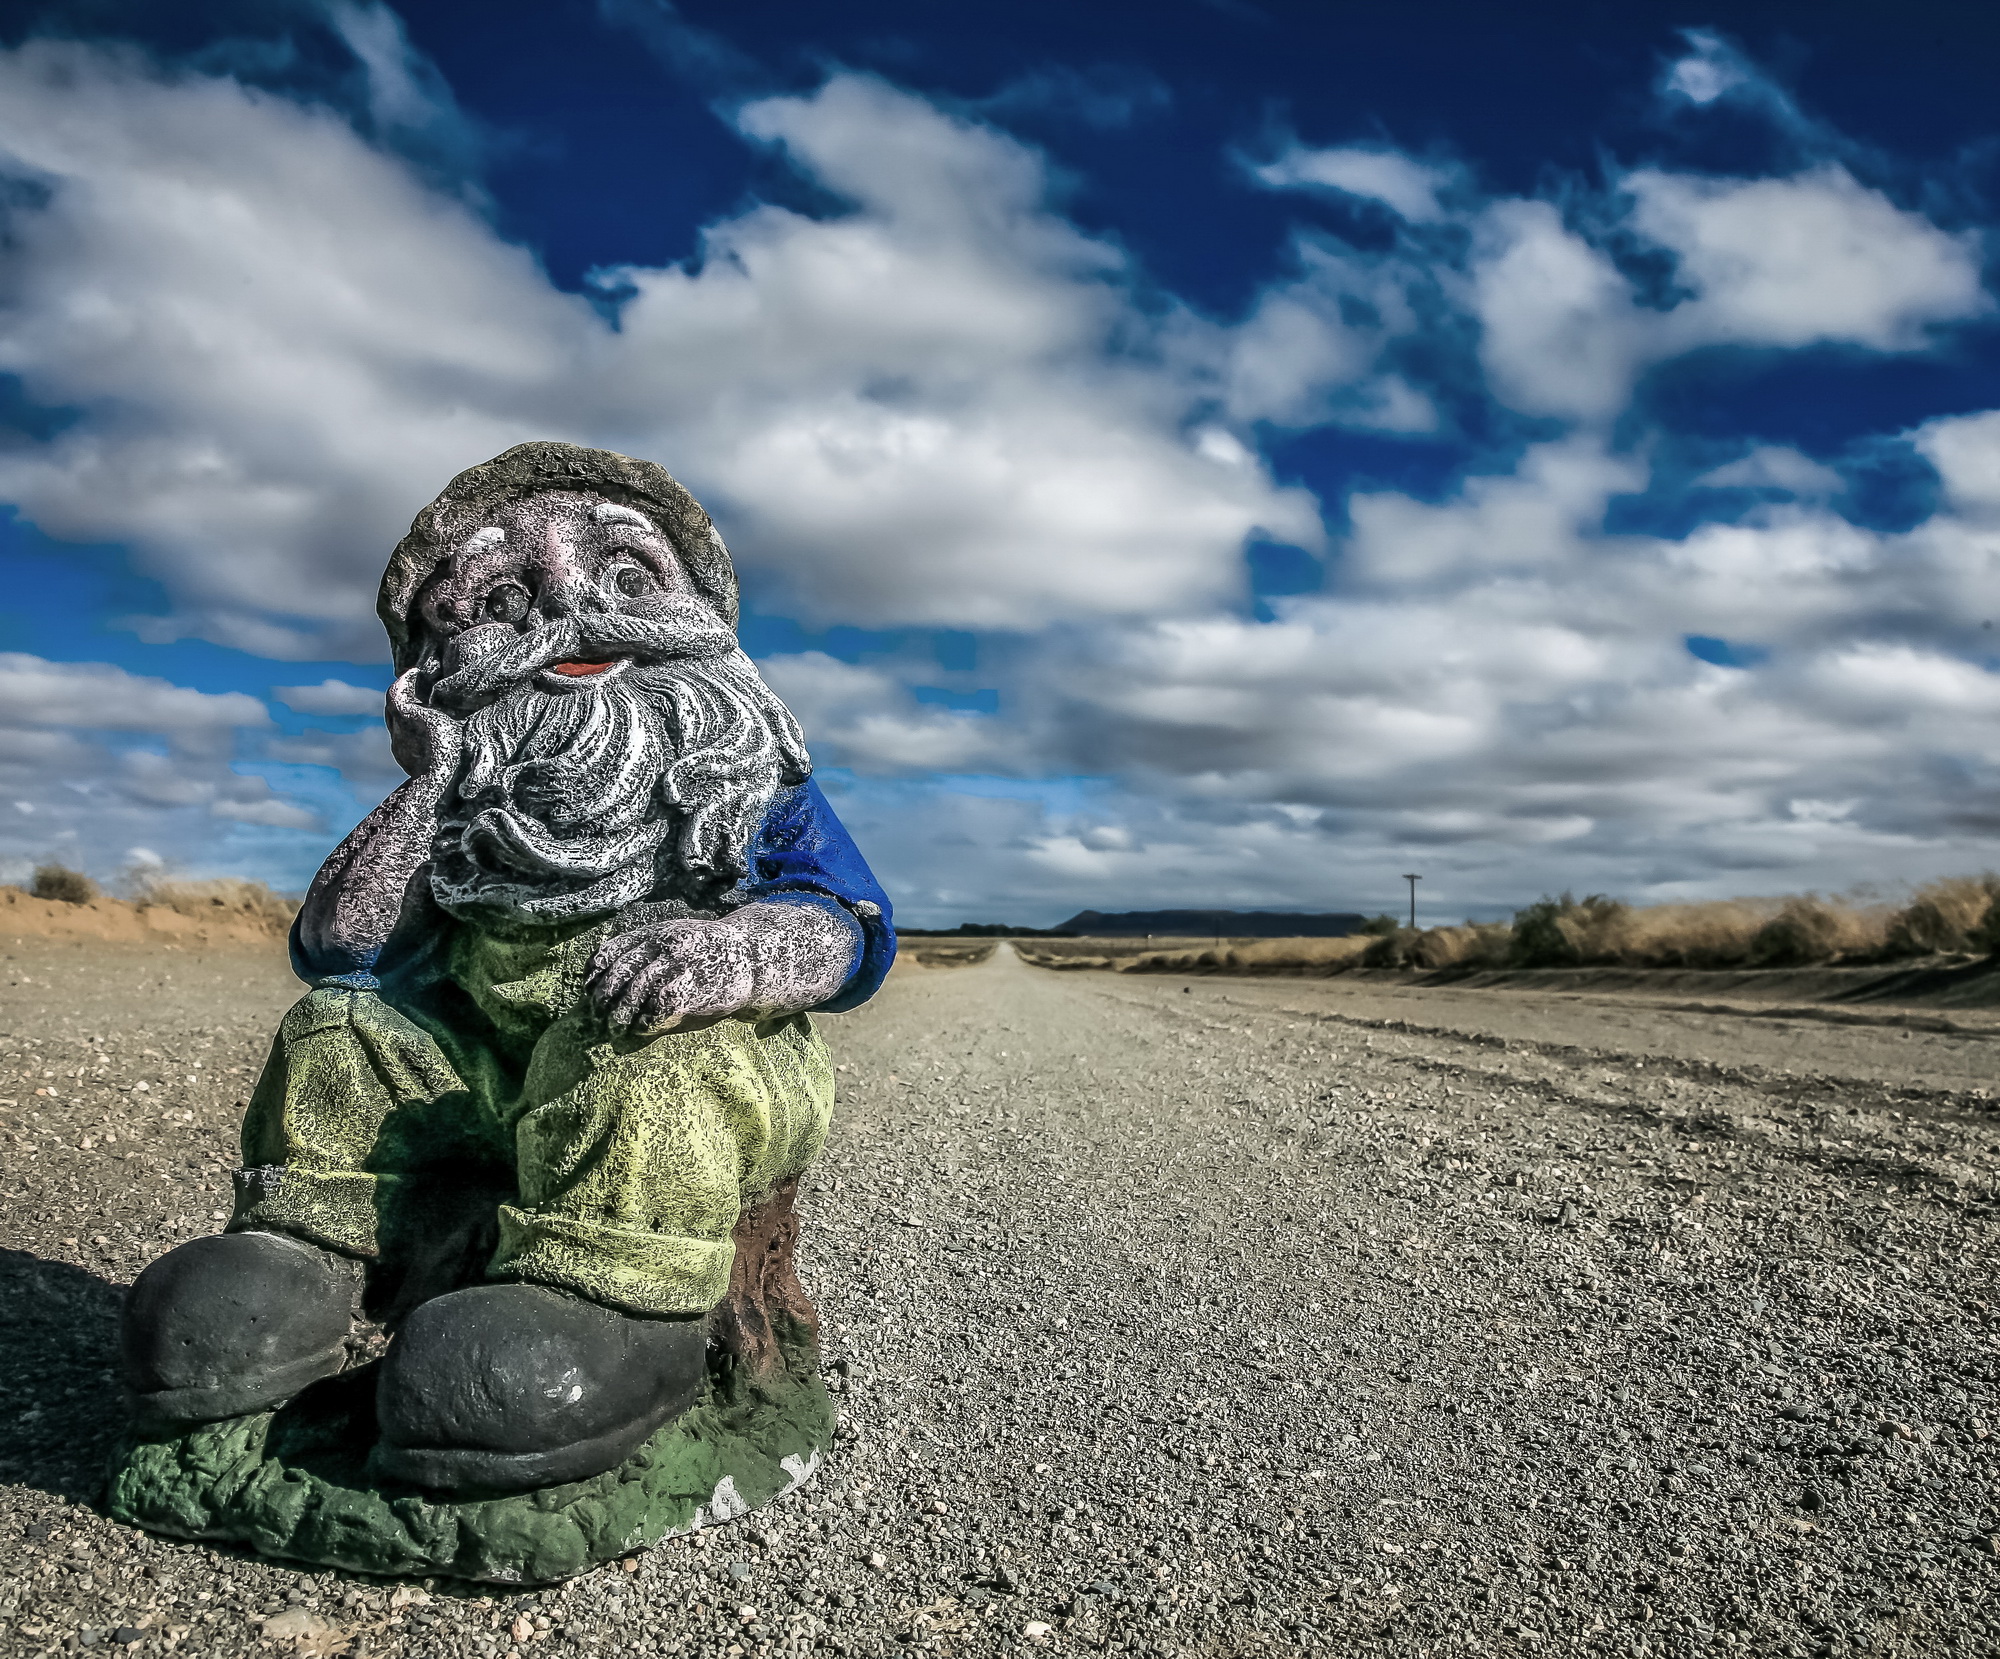 Every day is Casual Friday here in the platteland, and people are also remarkably tolerant of garden gnomes. Image: Chris Marais